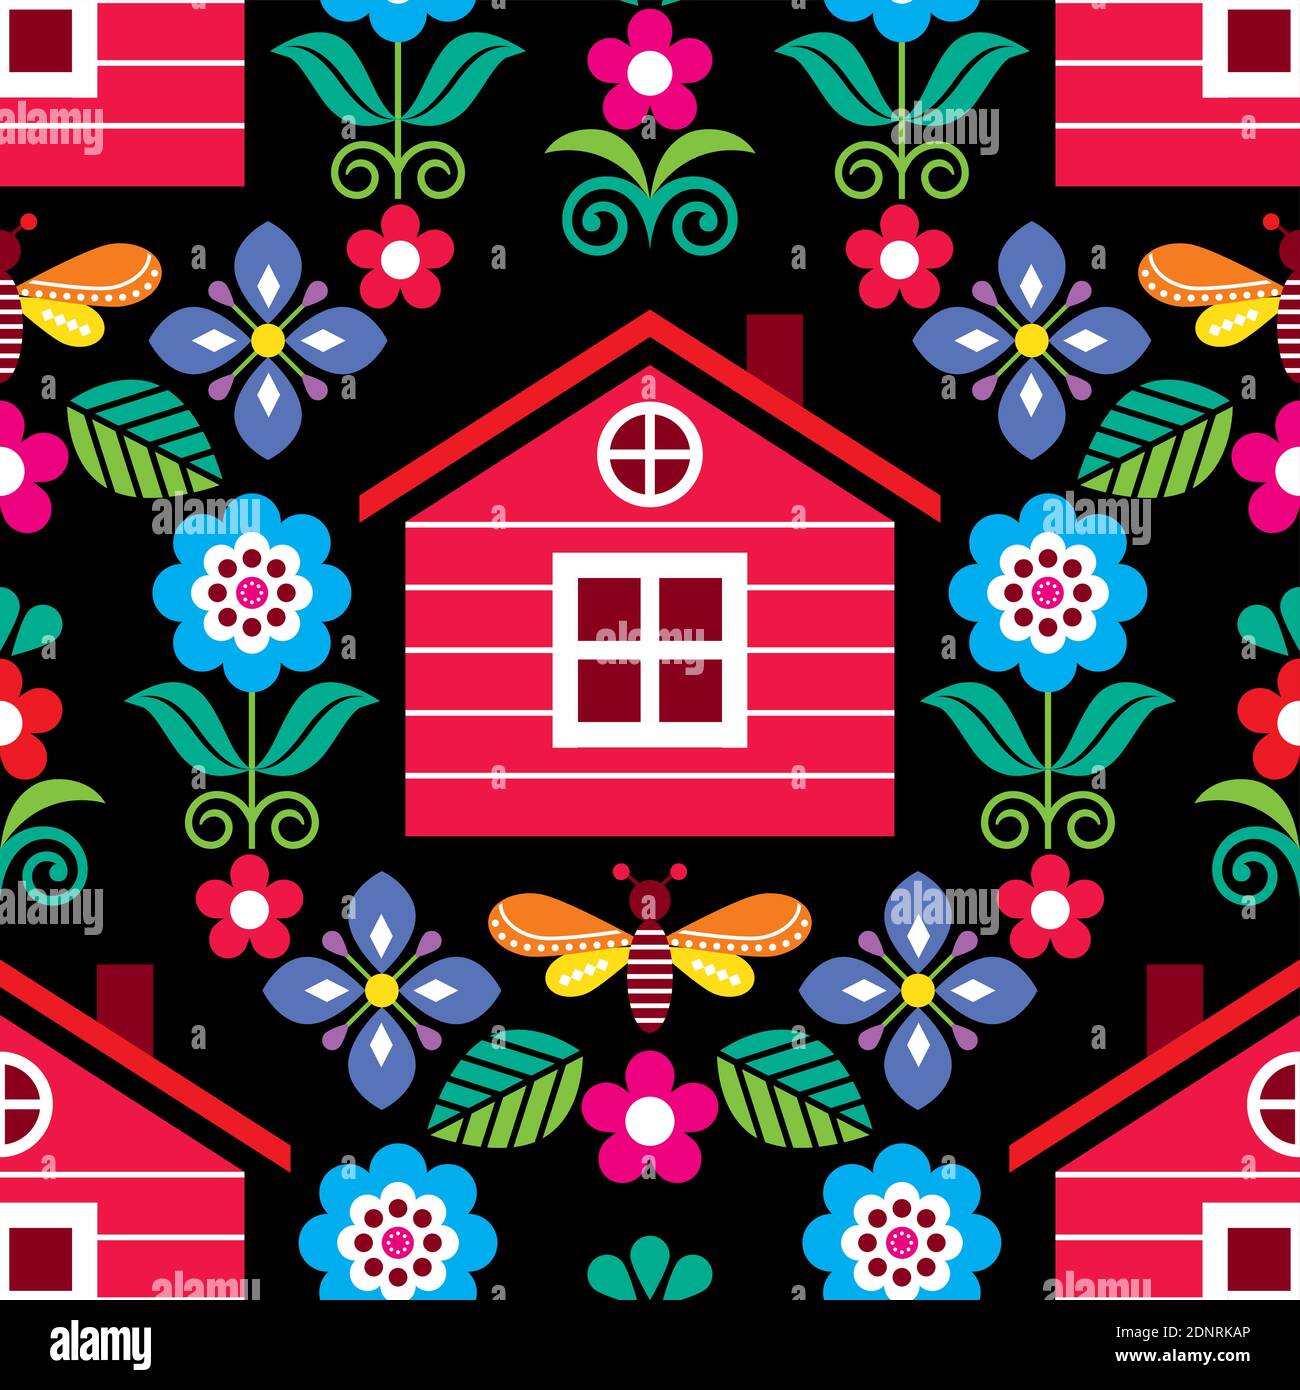 Scandinavian folk art seamless vector floral pattern with Finnish or Norwegian house, textile design with flowers on black Stock Vector